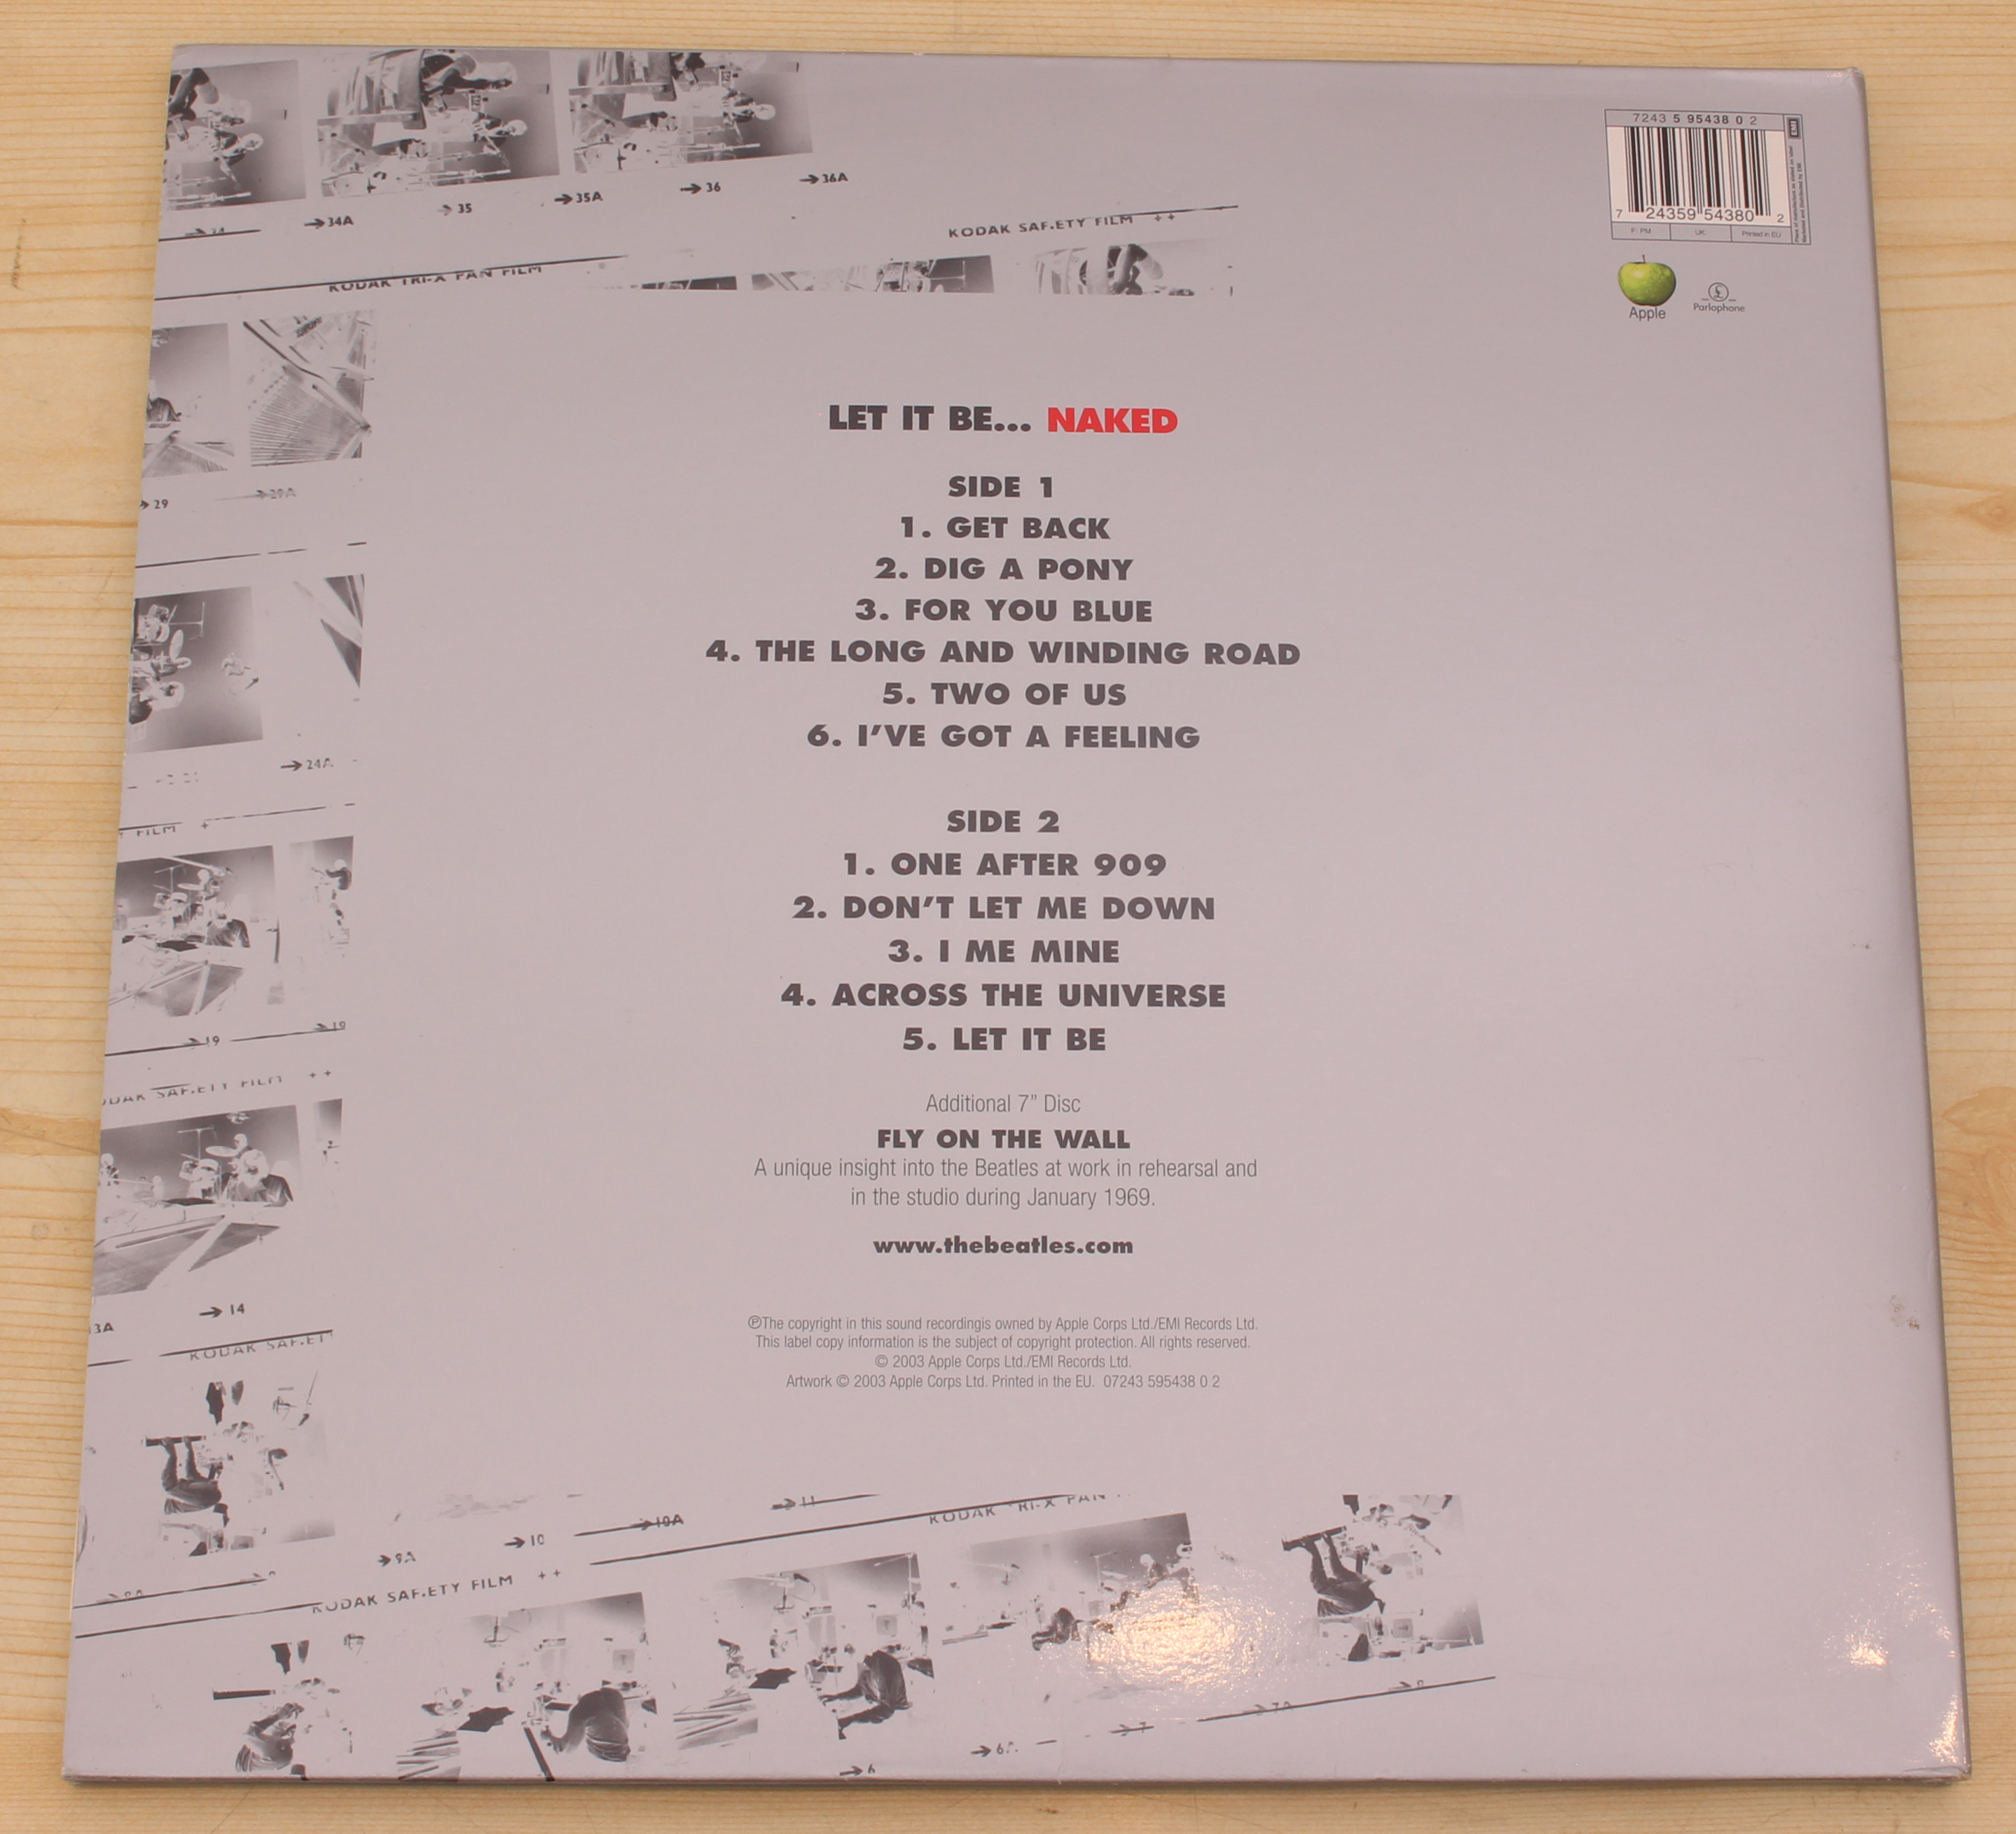 The Beatles - Let It Be ... Naked (Original UK 2003 album including limited edition 7" single and - Image 3 of 3